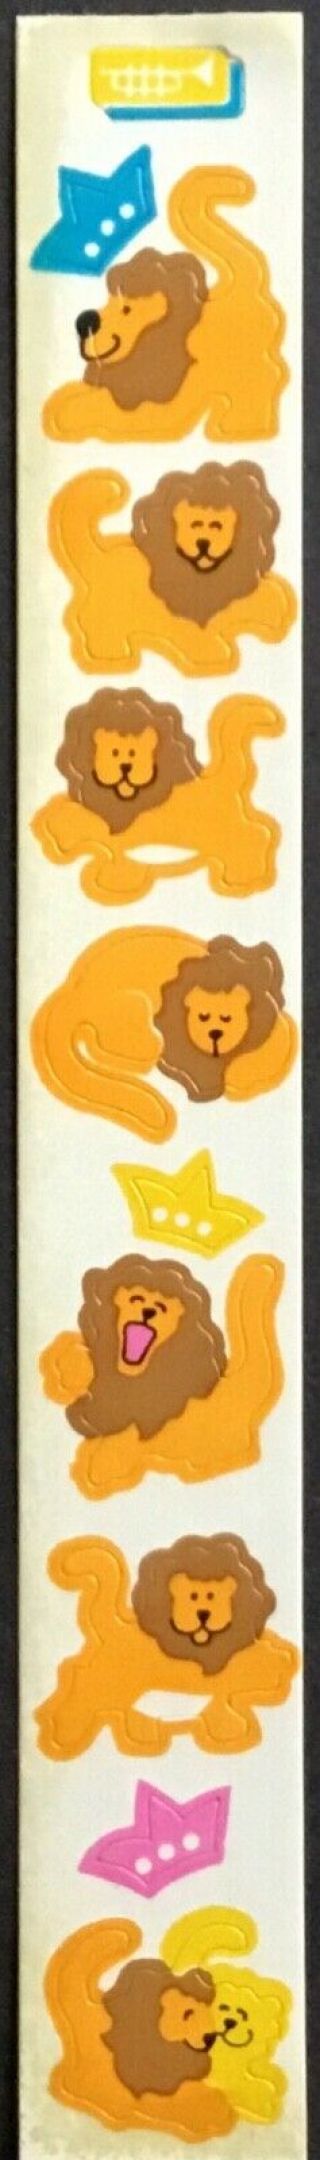 Vintage Stickers - Cardesign Toots - Lions - Dated 1983